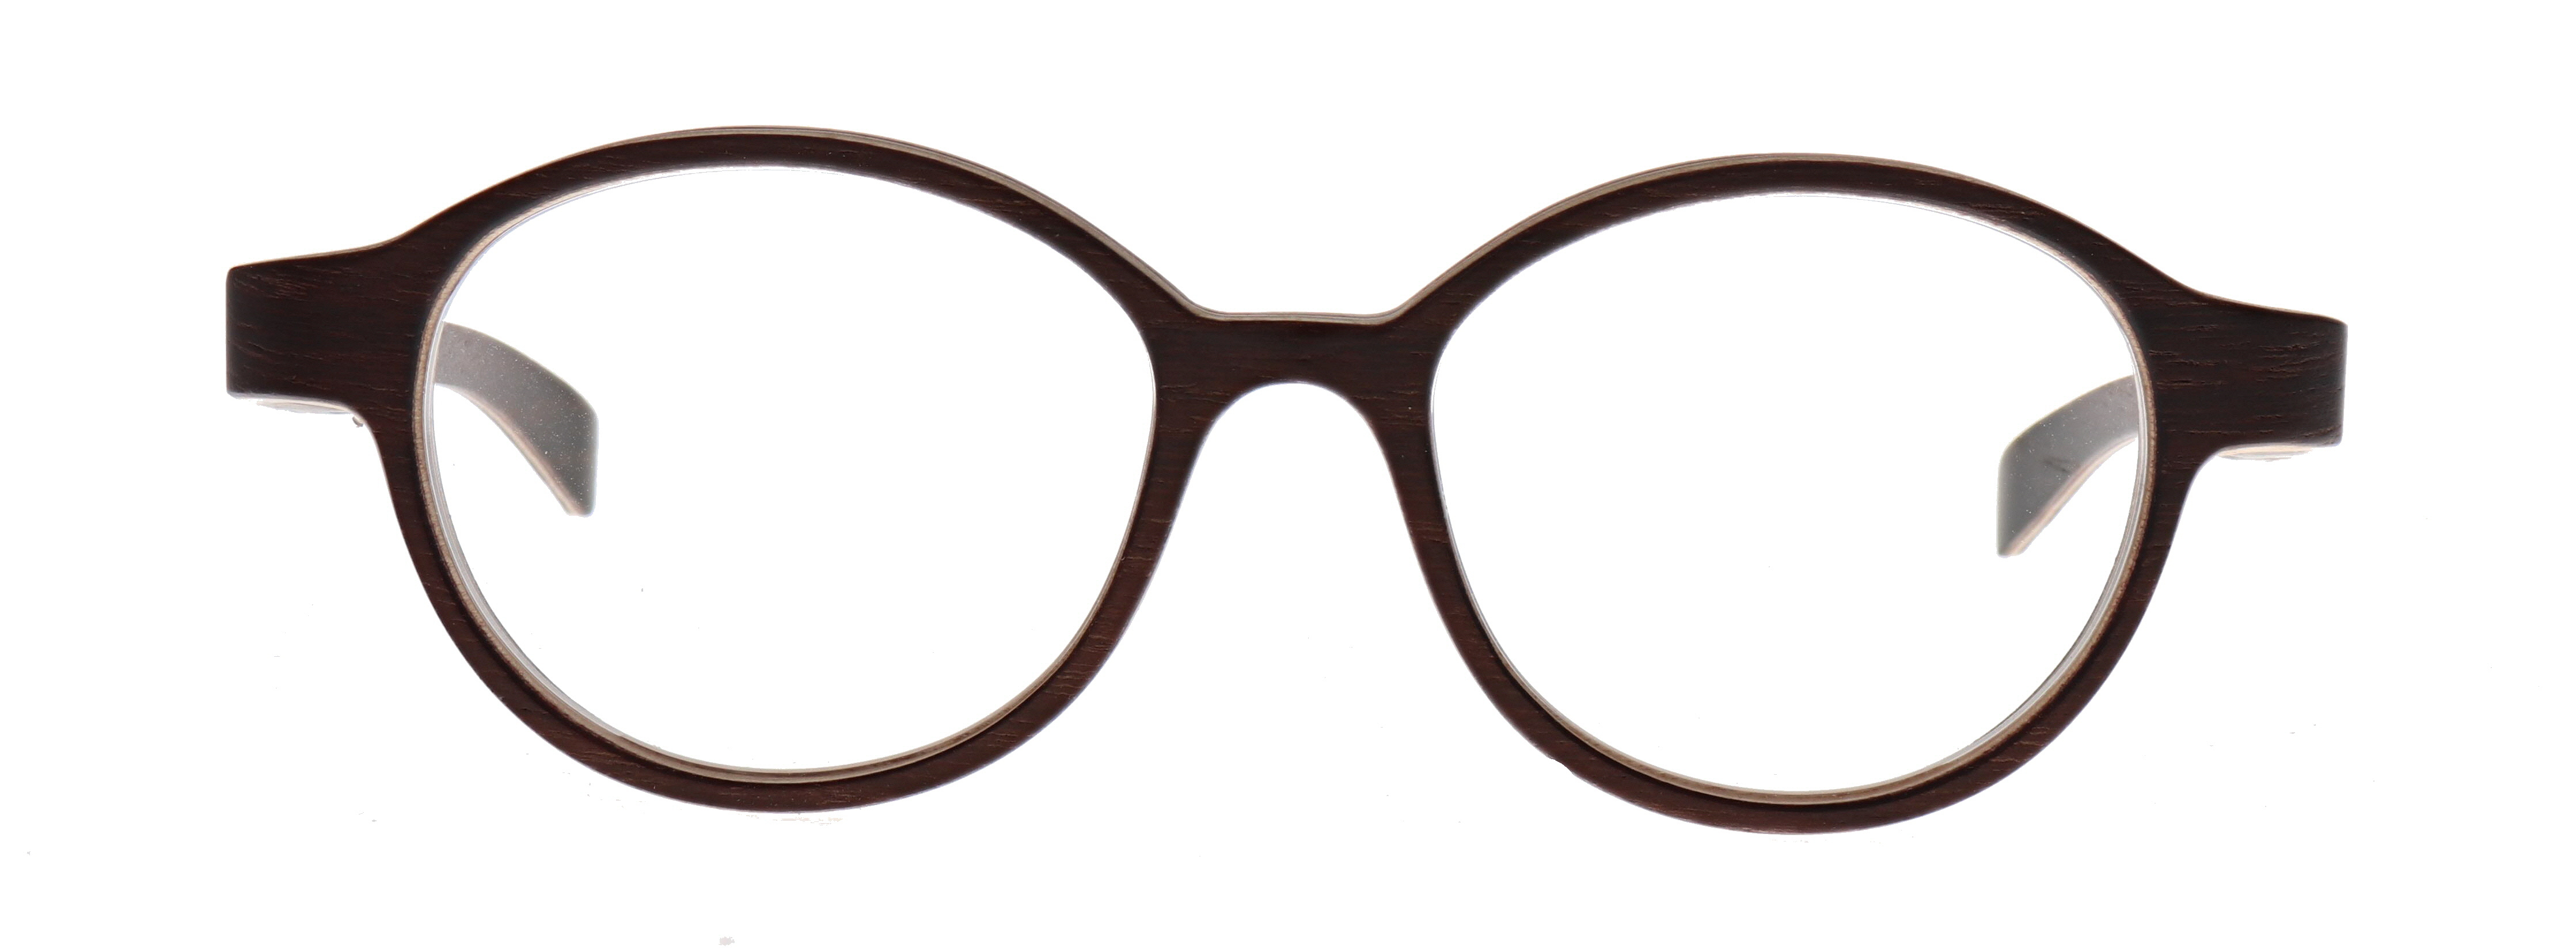 Rolf Spectacles Prestige